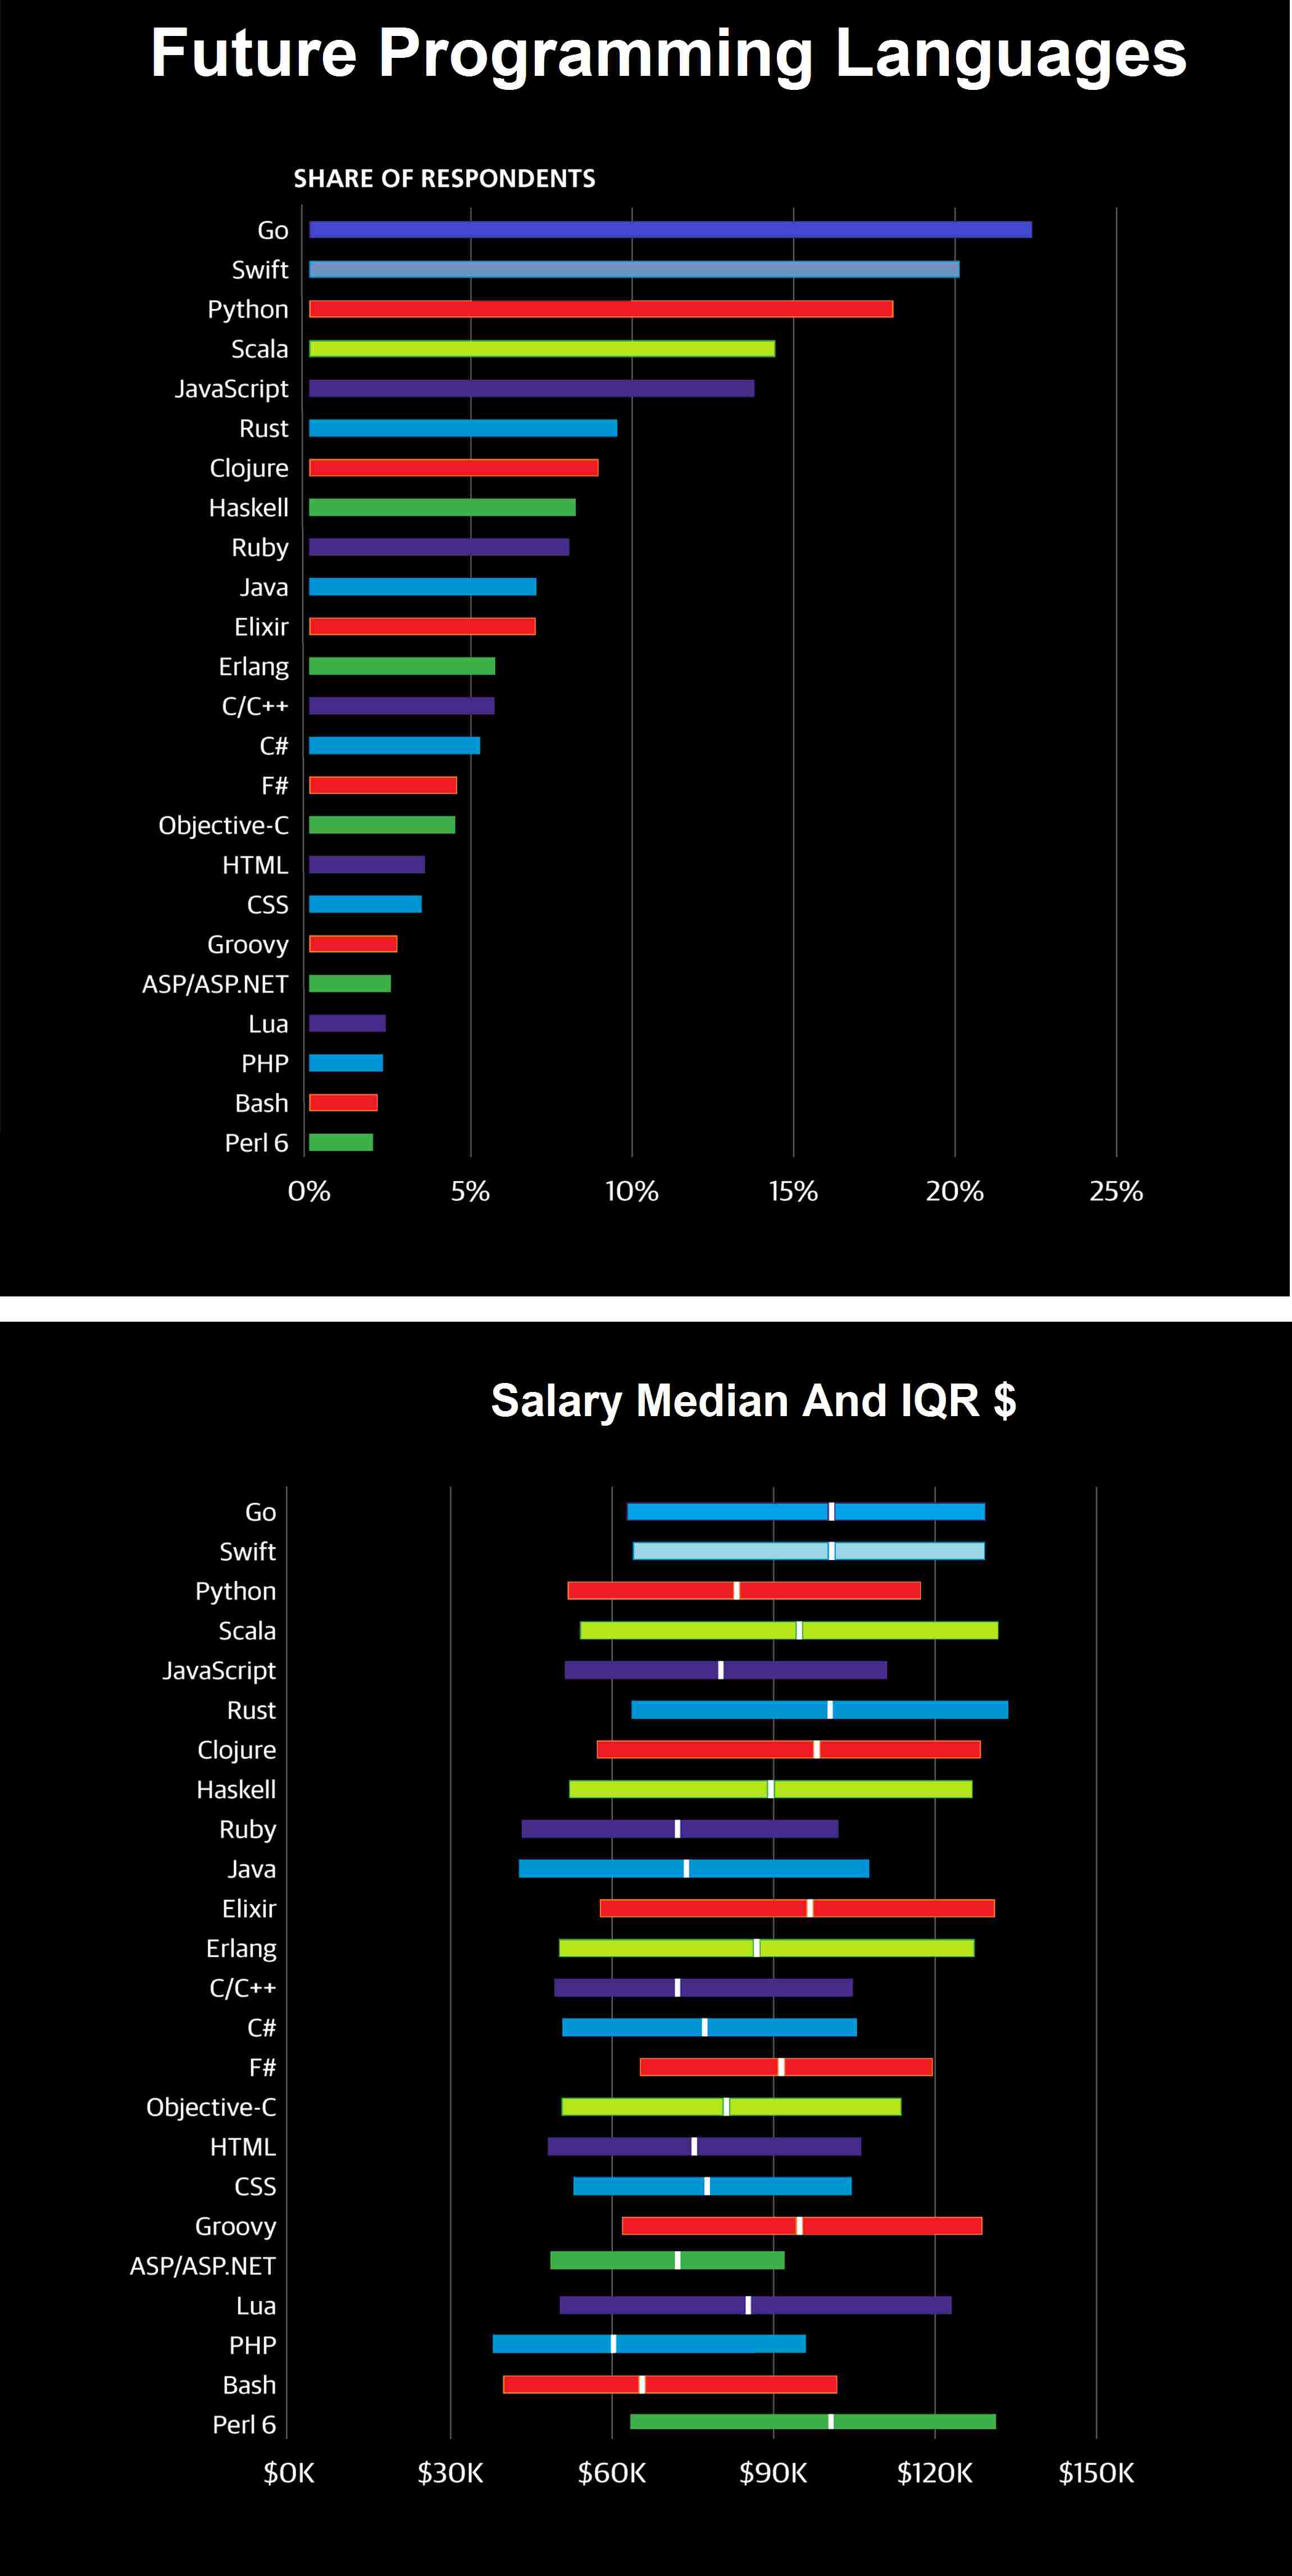 Future Programming Languages Future Programming Salary Median And IQR $